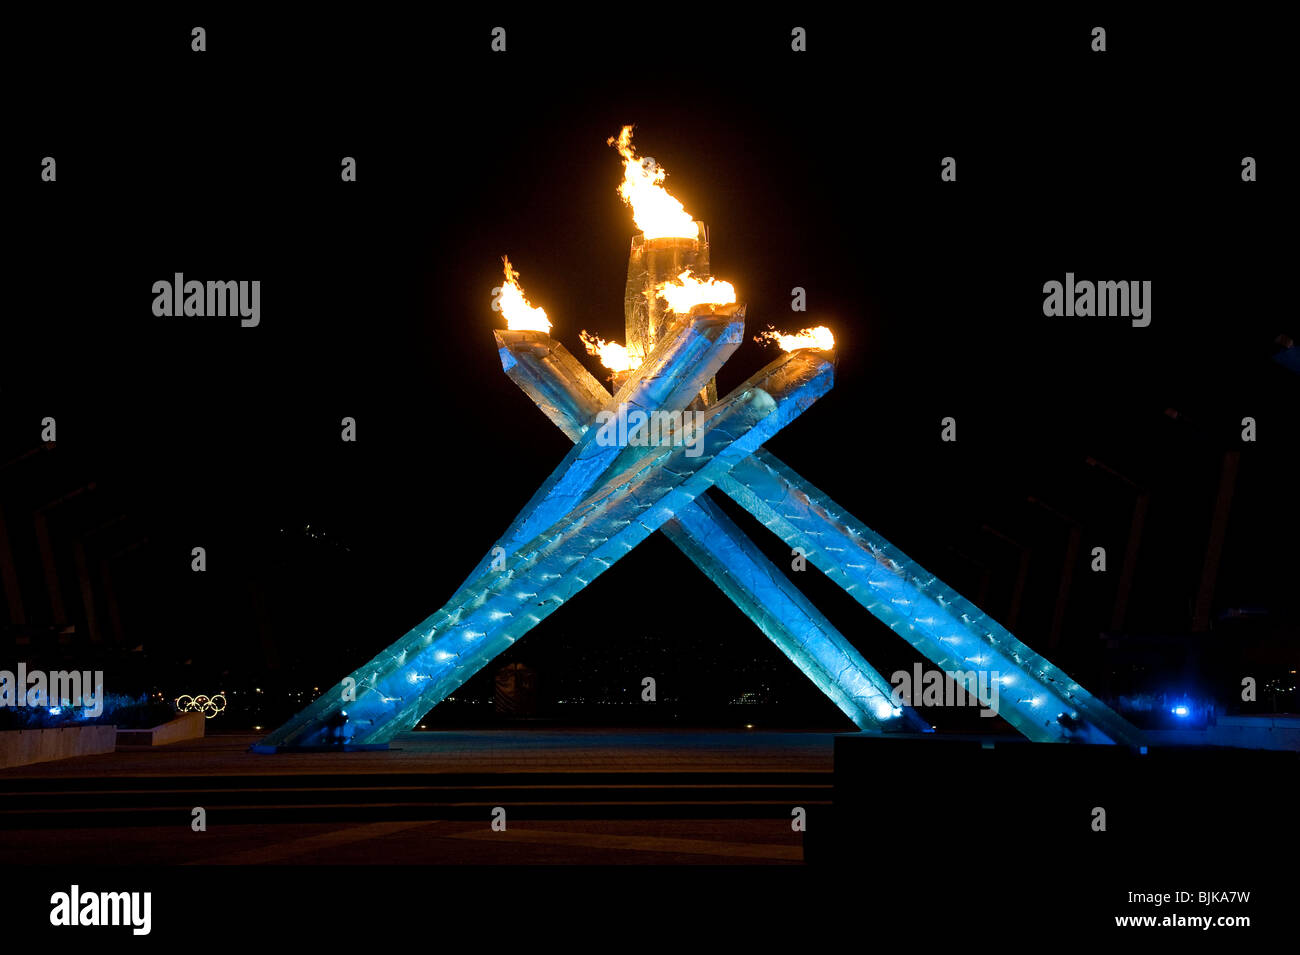 This is an image of the Olympic torch in Vancouver during the 2010 winter games. Stock Photo